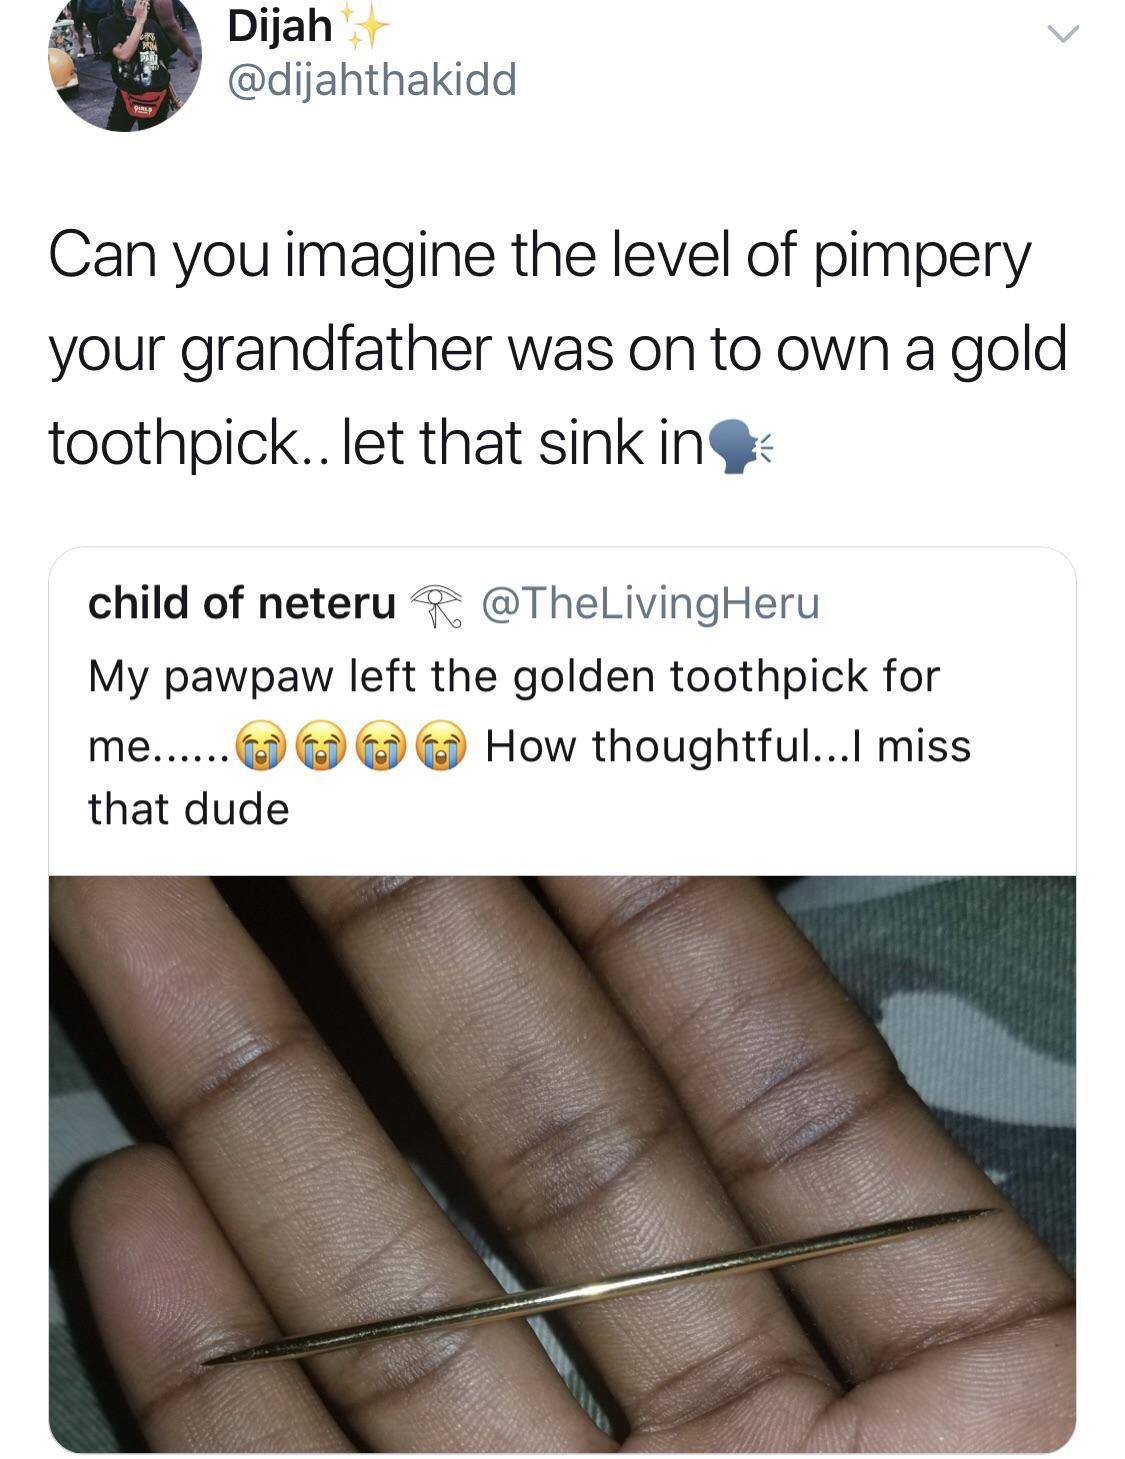 gold toothpick pimp - Dijah Al Can you imagine the level of pimpery your grandfather was on to own a gold toothpick.. let that sink in child of neteru R My pawpaw left the golden toothpick for me..... How thoughtful...I miss that dude